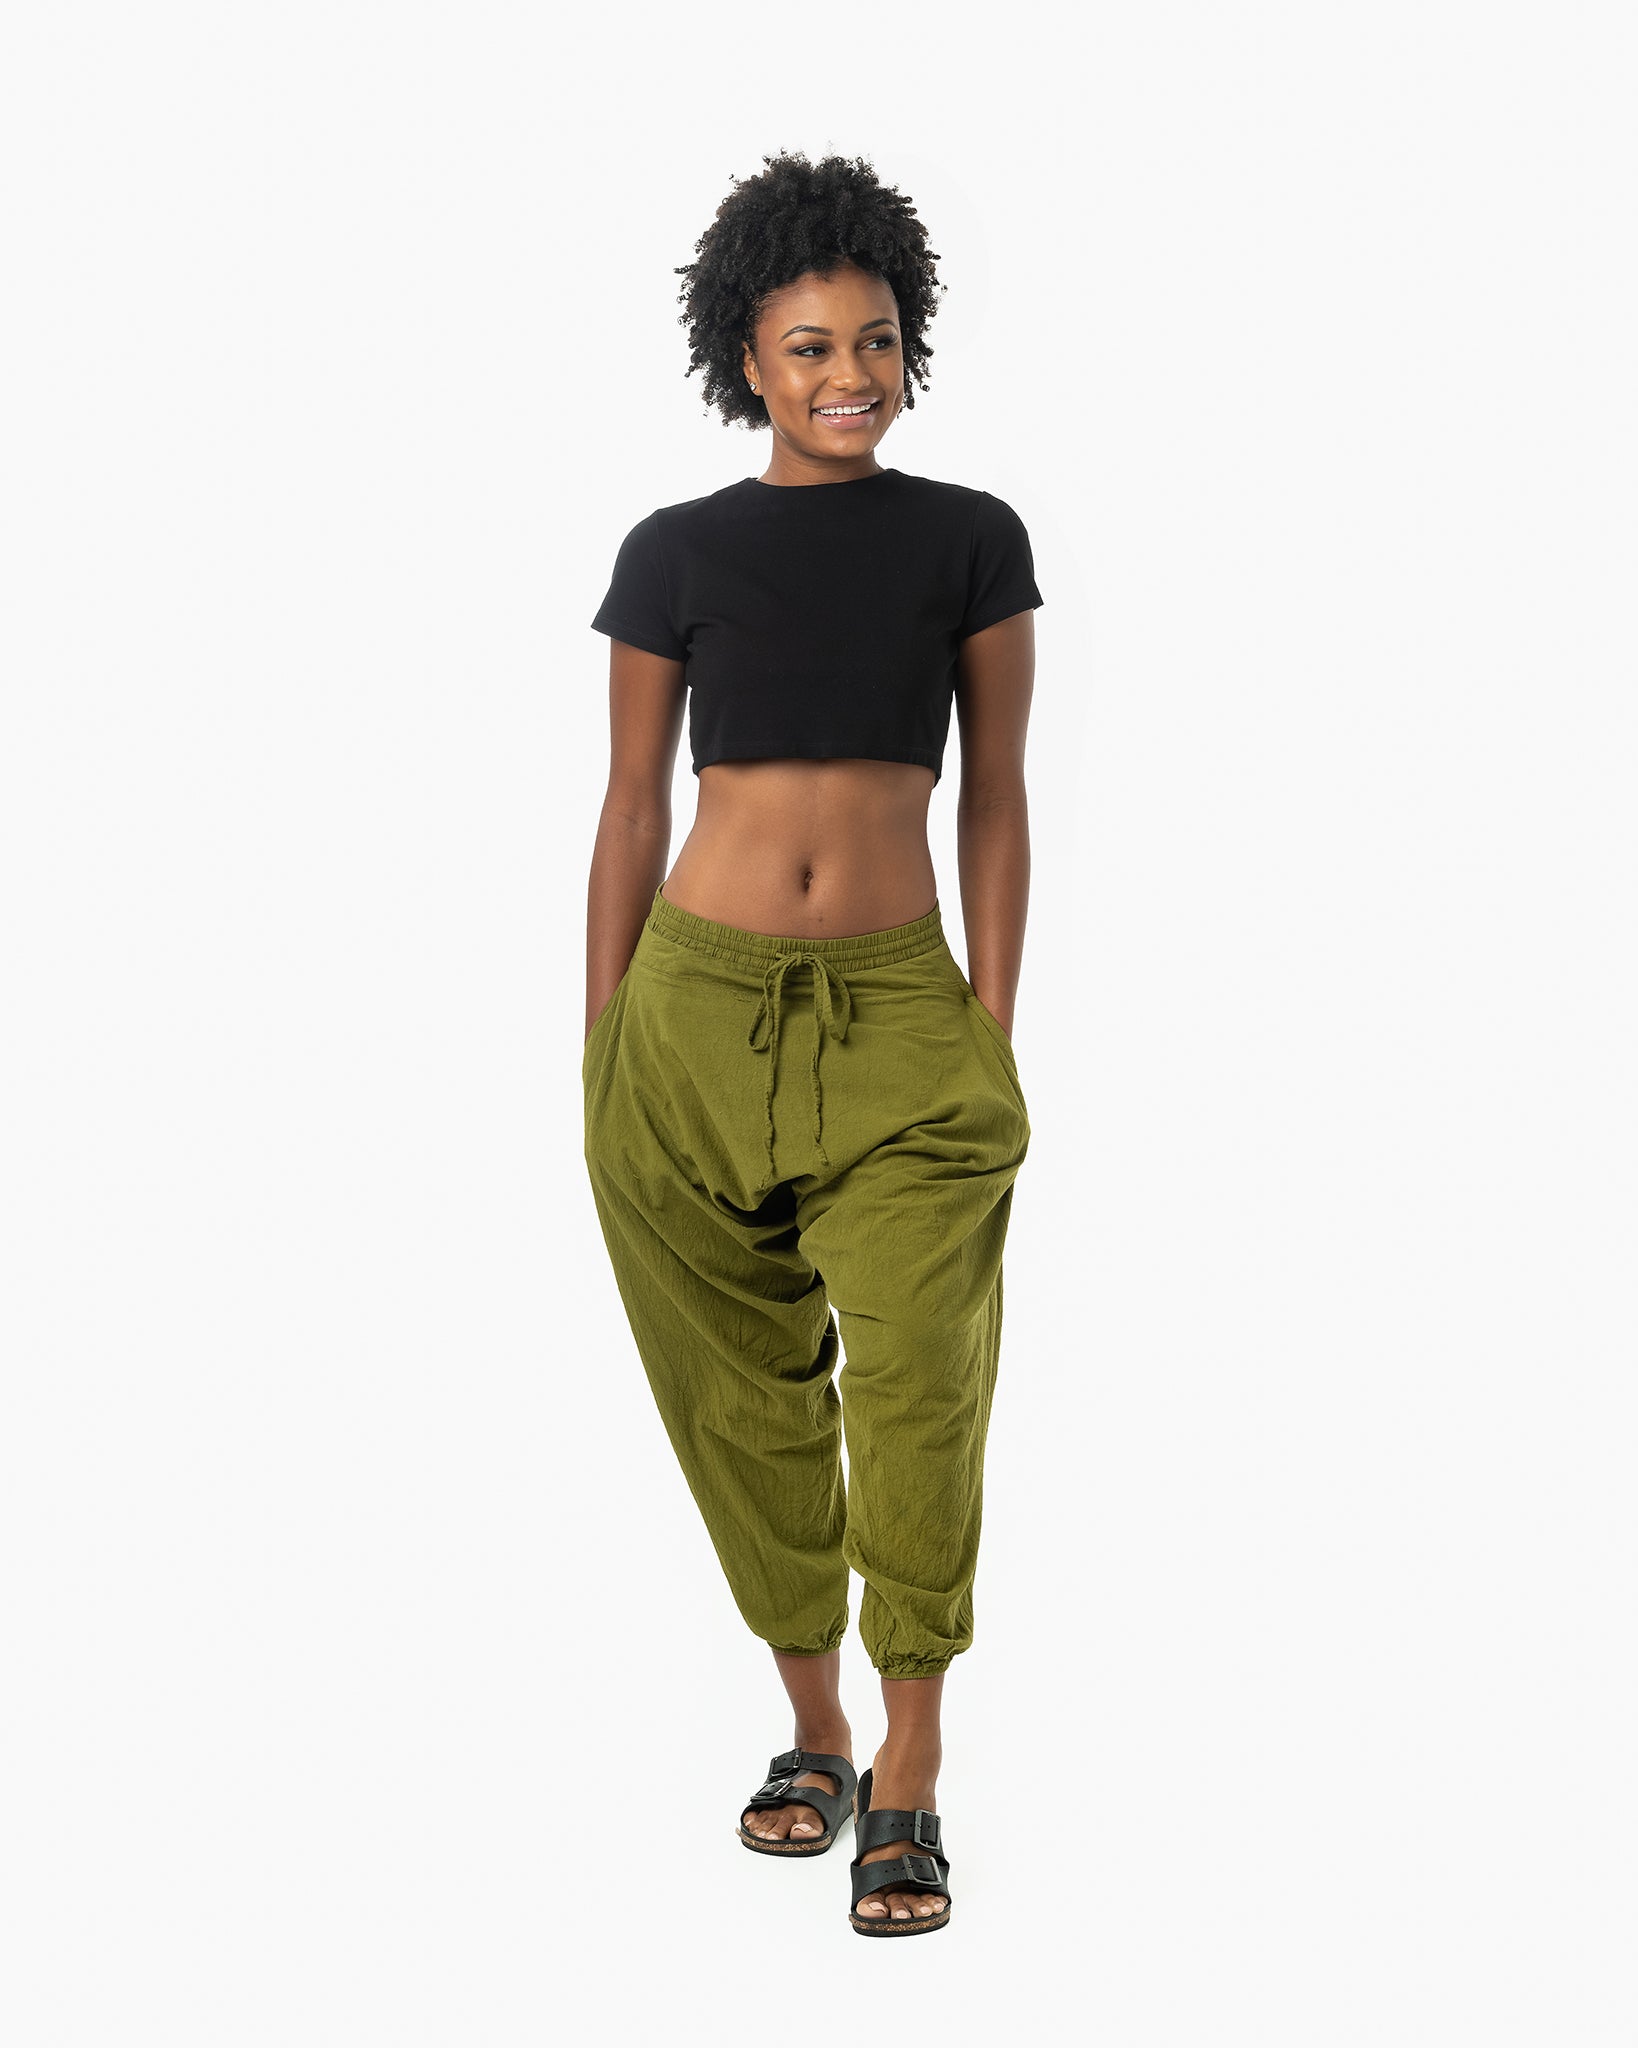 Shop Harlan Pants Women Sale with great discounts and prices